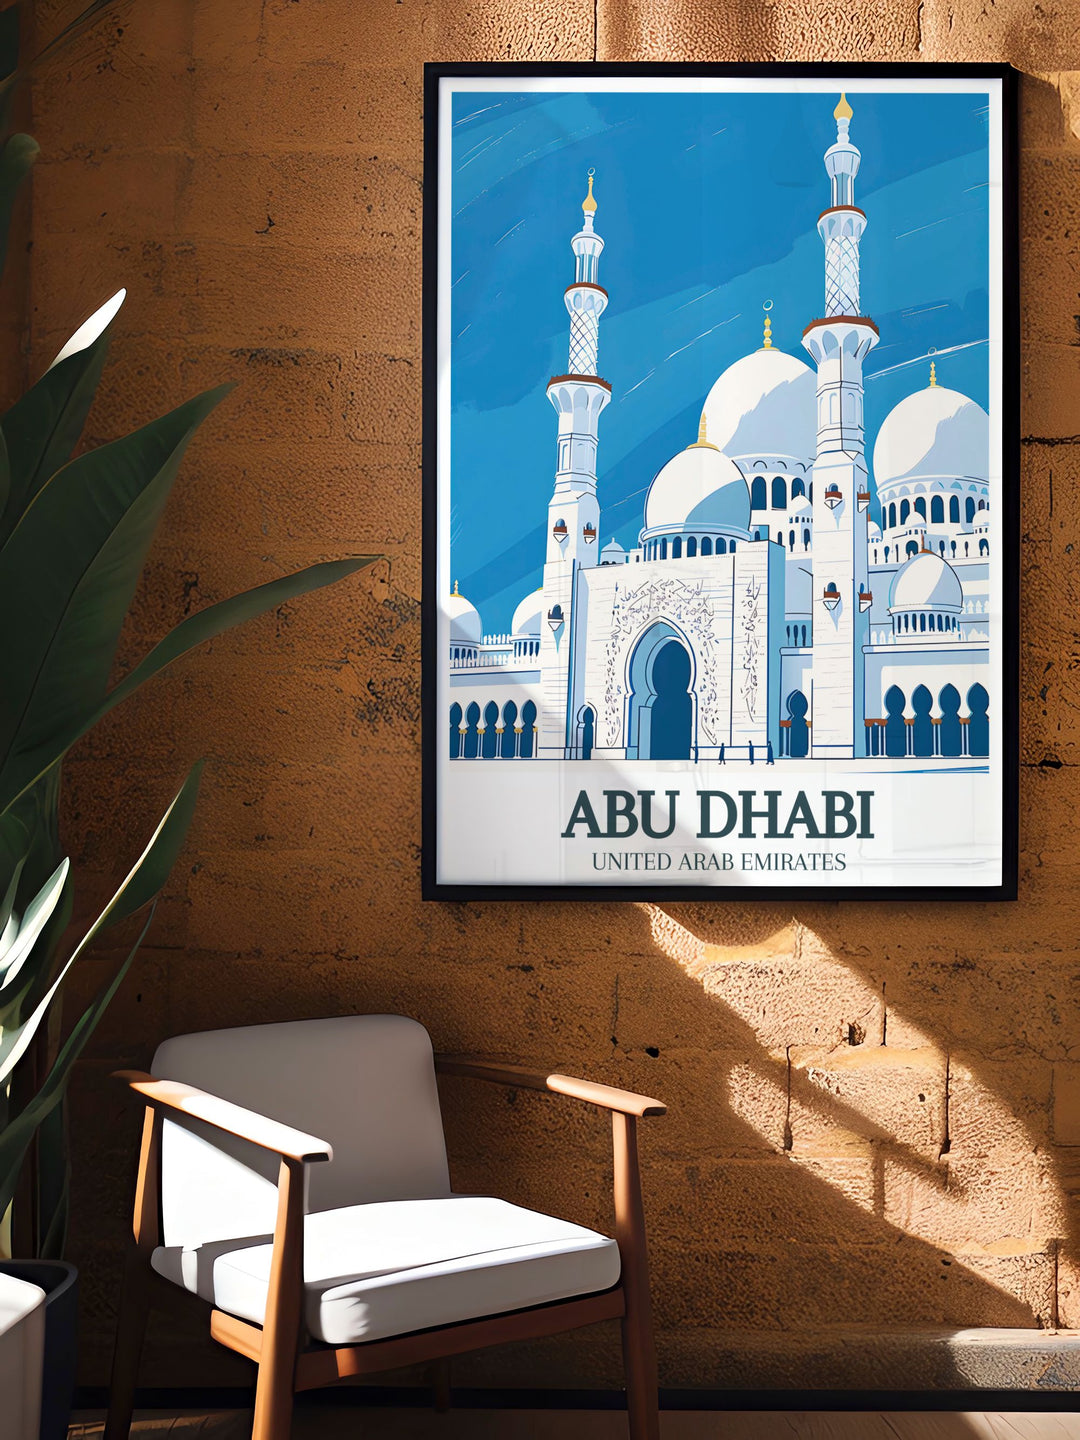 Captivating vintage print featuring the Sheikh Zayed Grand Mosque, Al Rawdah in Abu Dhabi. This Emirates poster celebrates the beauty of the United Emirates and is an ideal gift for travelers and lovers of Middle Eastern culture.